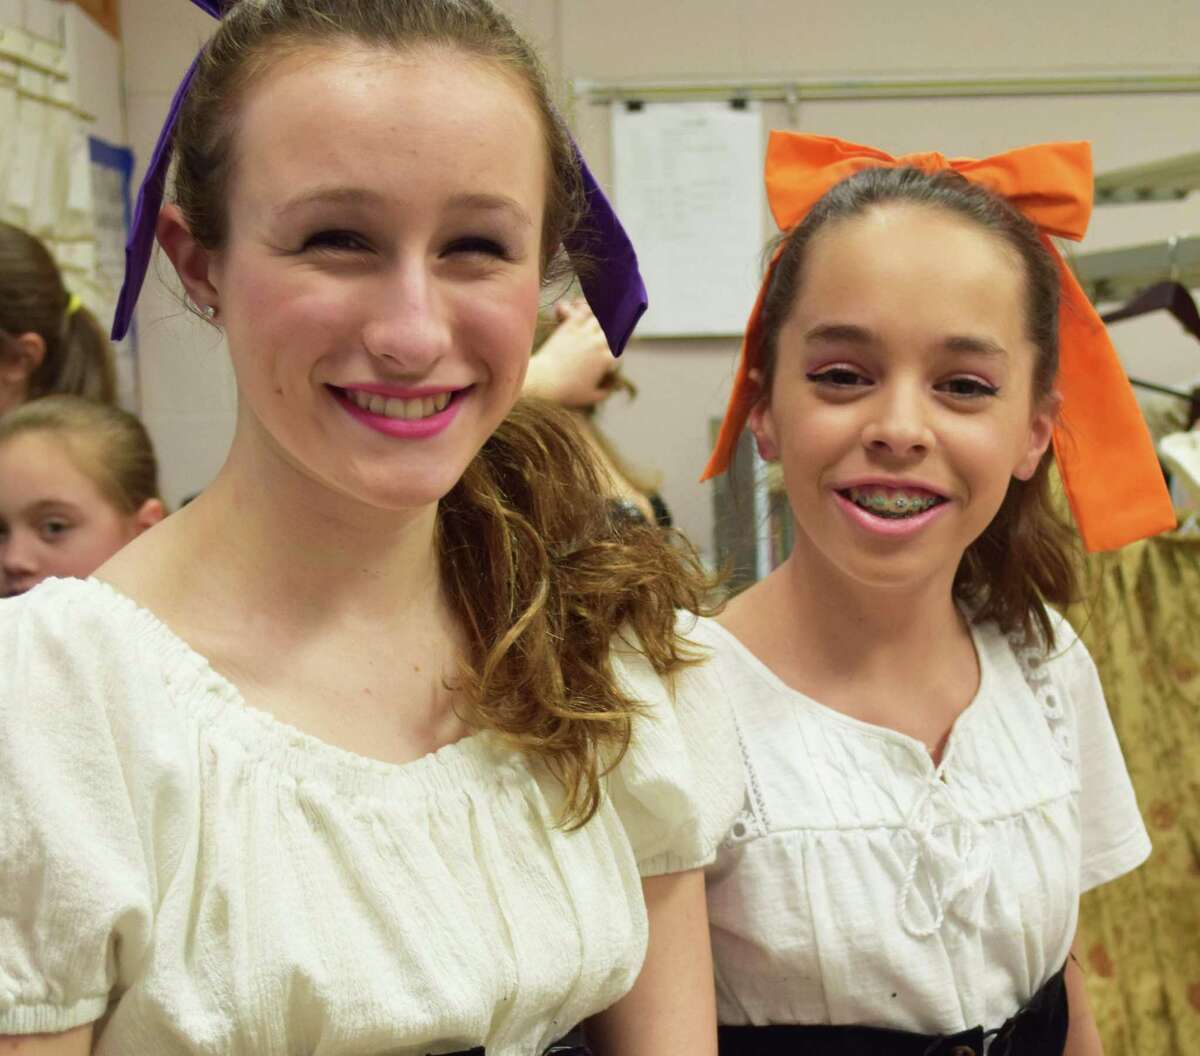 Spectrum/Emma Padros, left and Leah Lawson, who portray silly girls, are prepped to hit the stage for the March 28, 2017 dress rehearsal of "Beauty and The Beast Jr." at Schaghticoke Middle School in New Milford. The play will be staged several times beginning March 31, 2017.